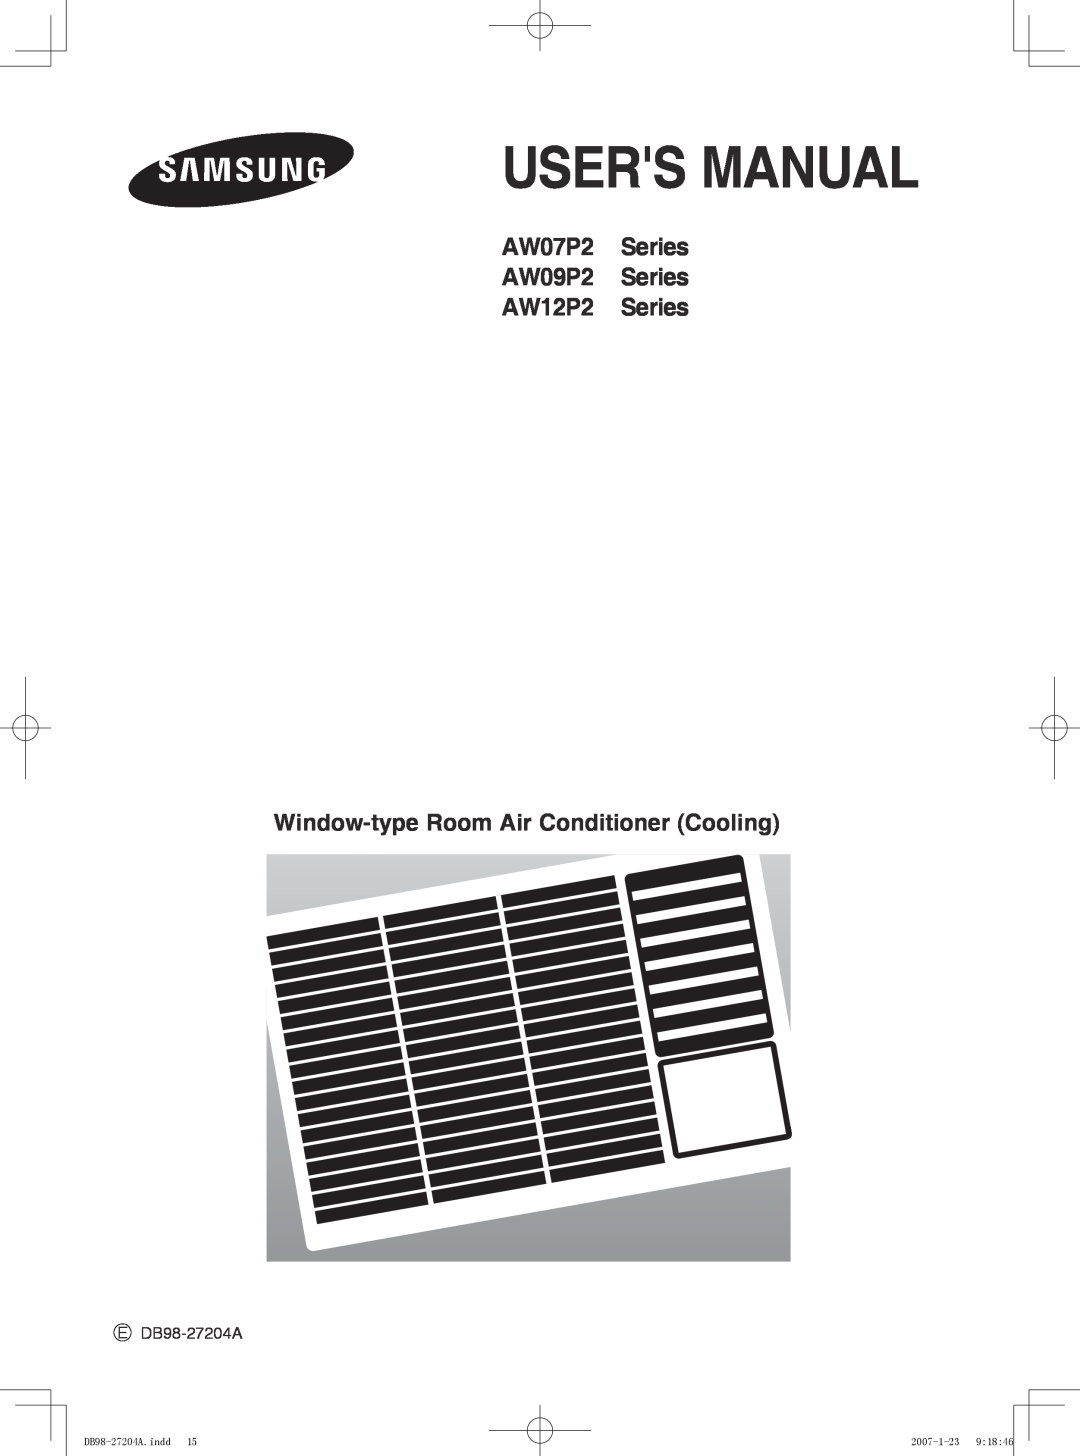 Samsung user manual AW07P2 Series AW09P2 Series AW12P2 Series, Window-typeRoom Air Conditioner Cooling, 2007-1-239 18 